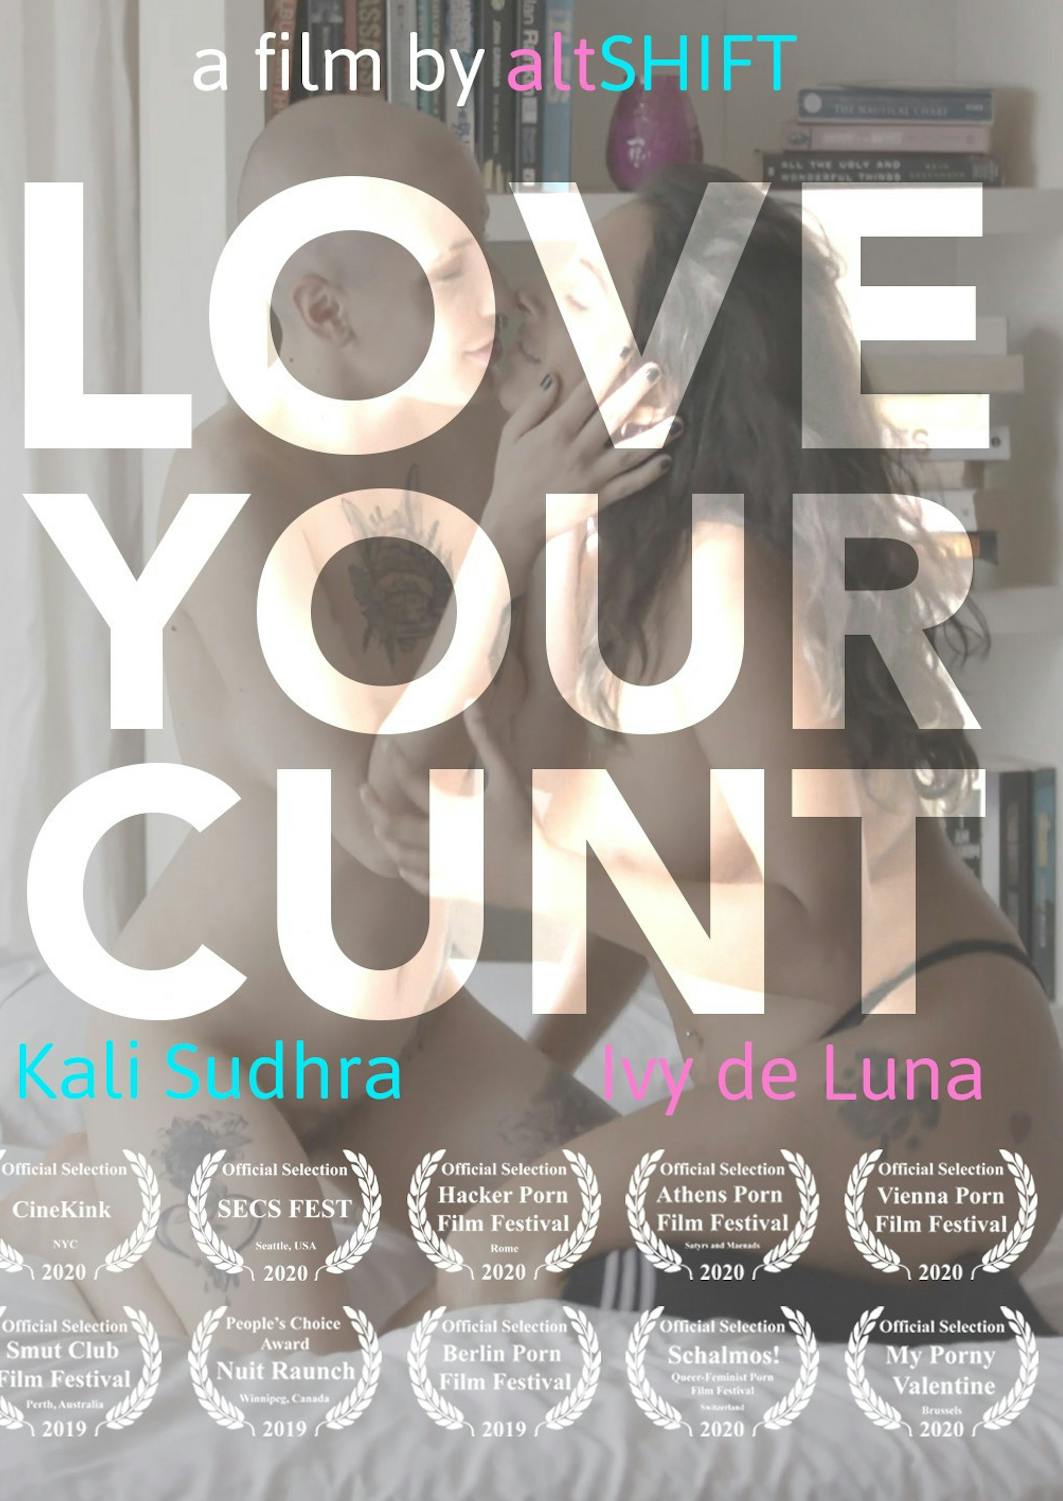 Love Your Cunt